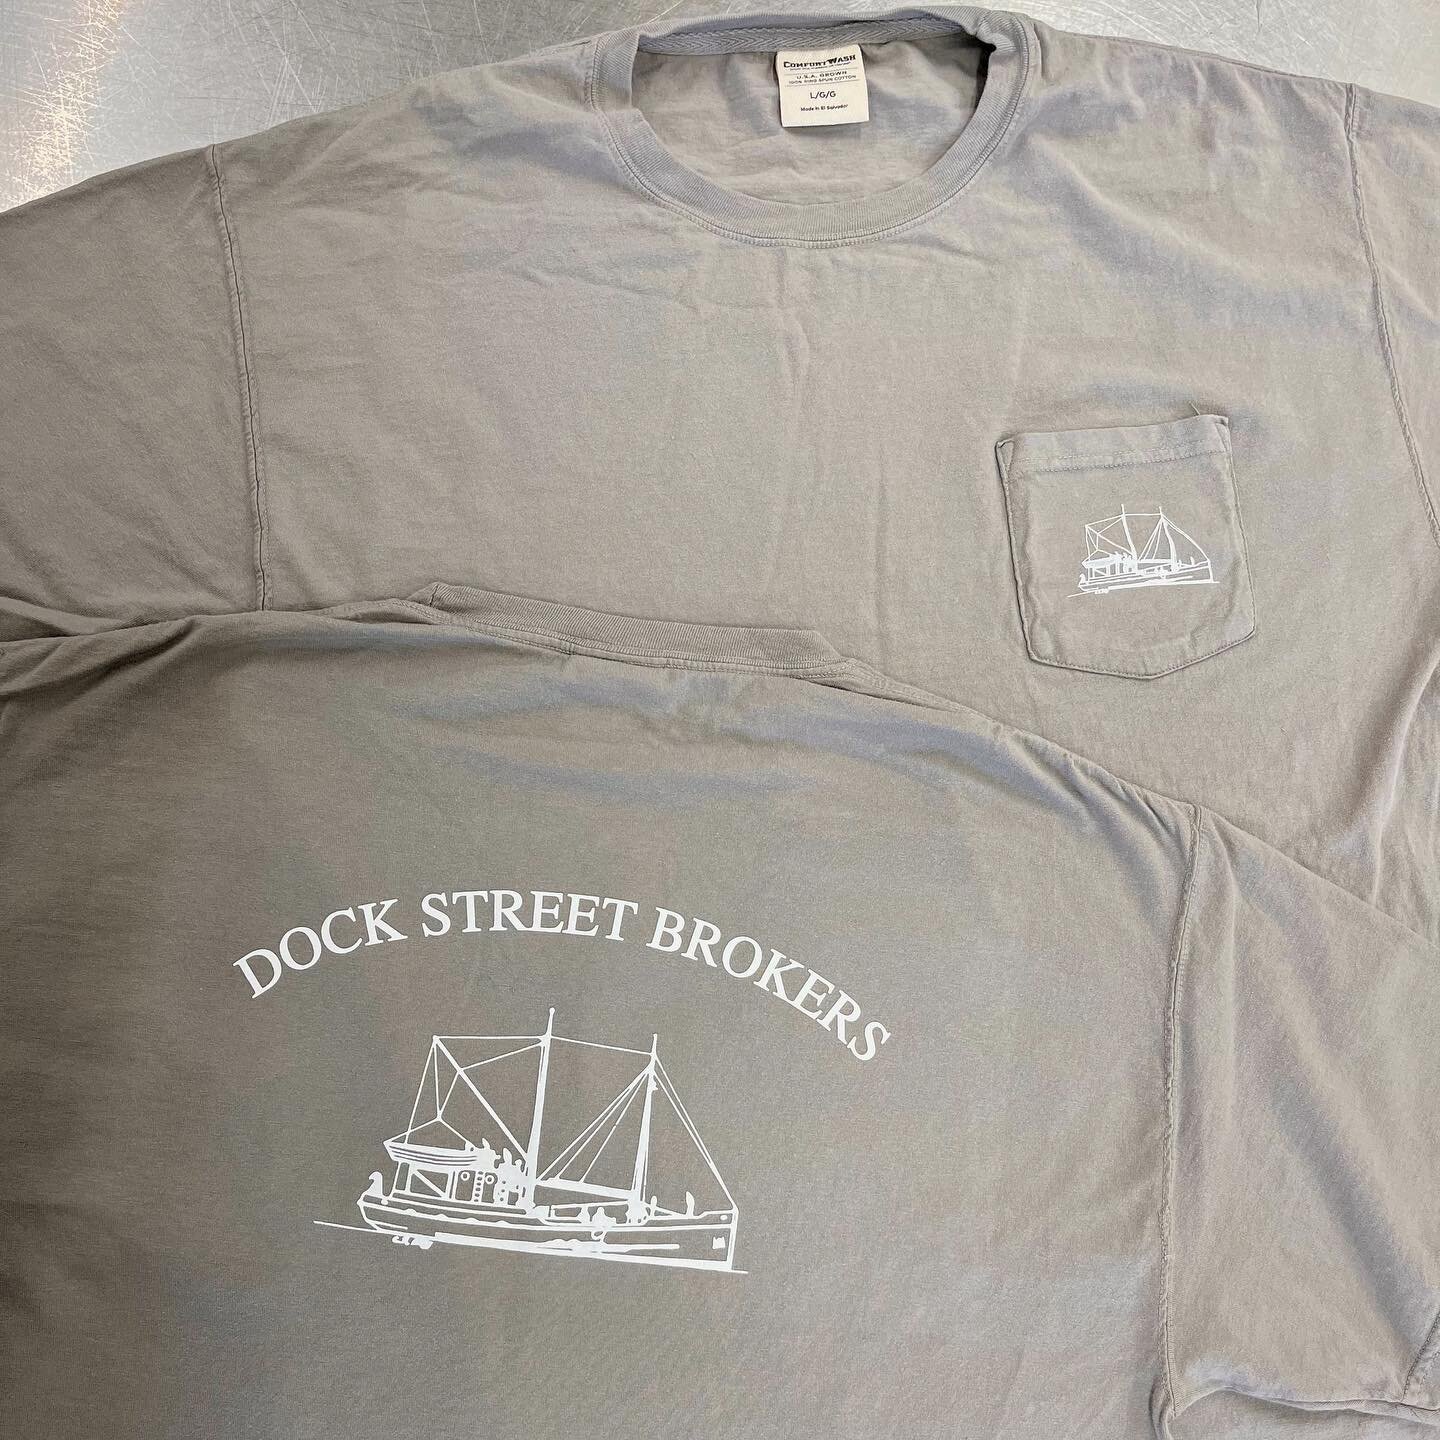 Dock Street Brockers taking advantage of the dead stock sale with these garment dyed pocket tees.